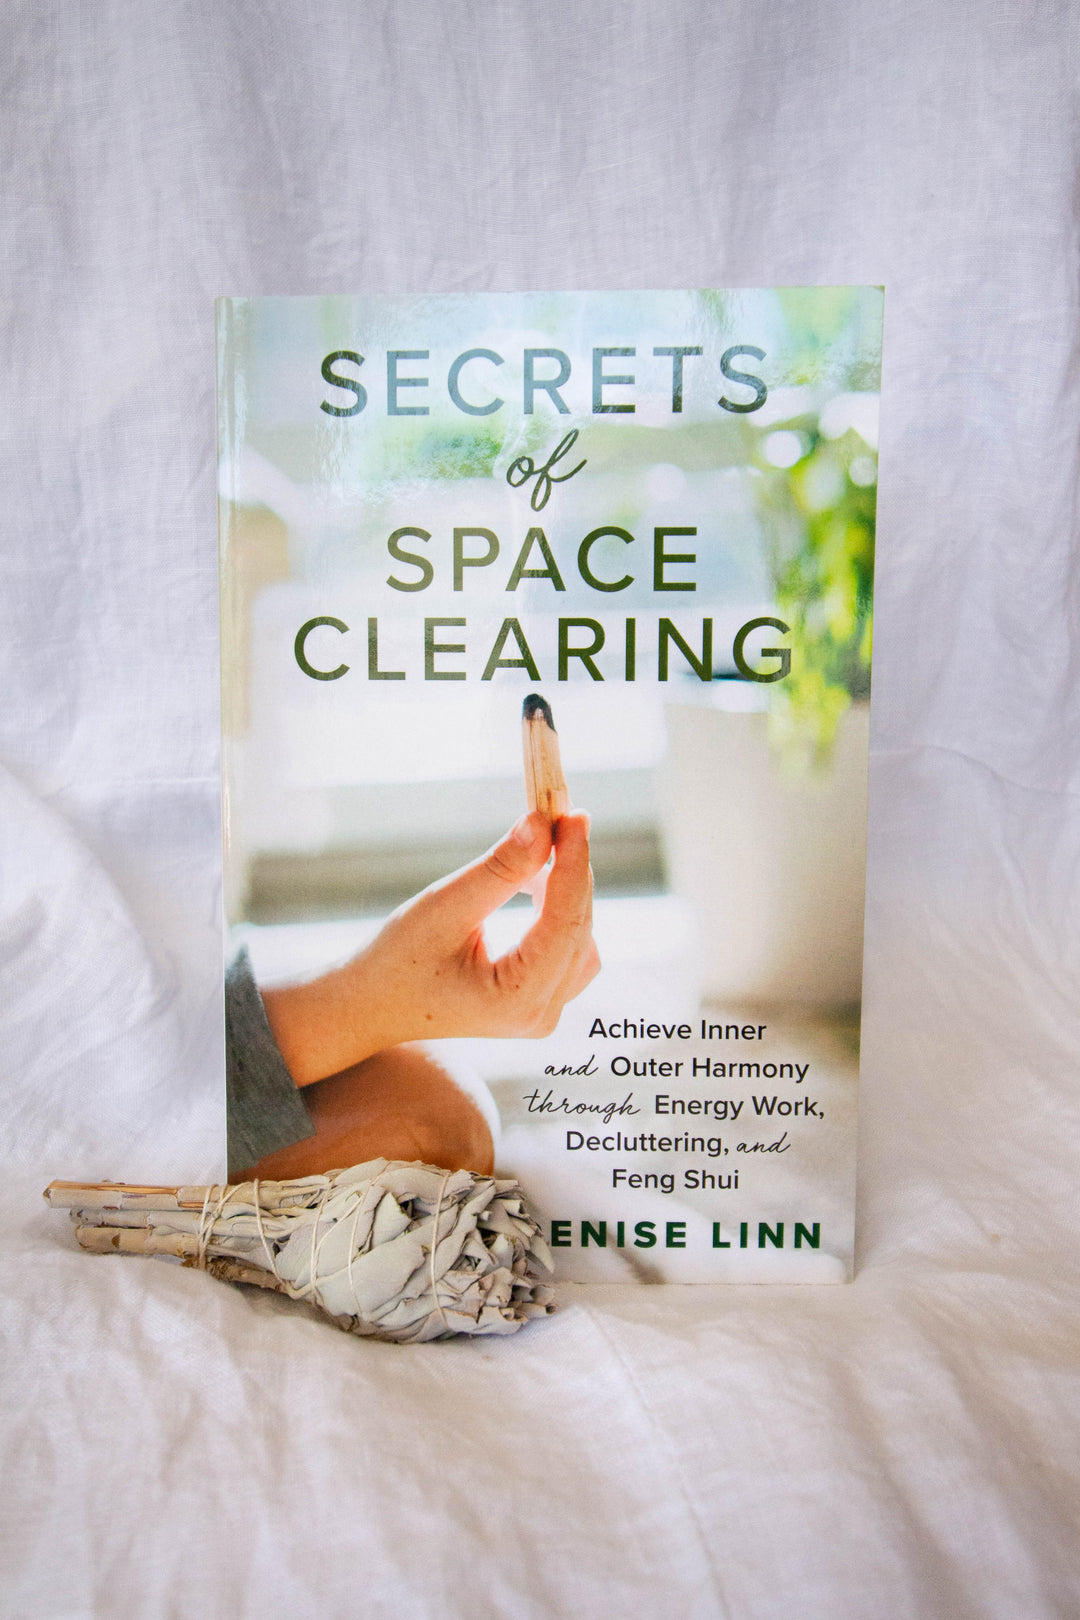 SECRETS OF SPACE CLEARING